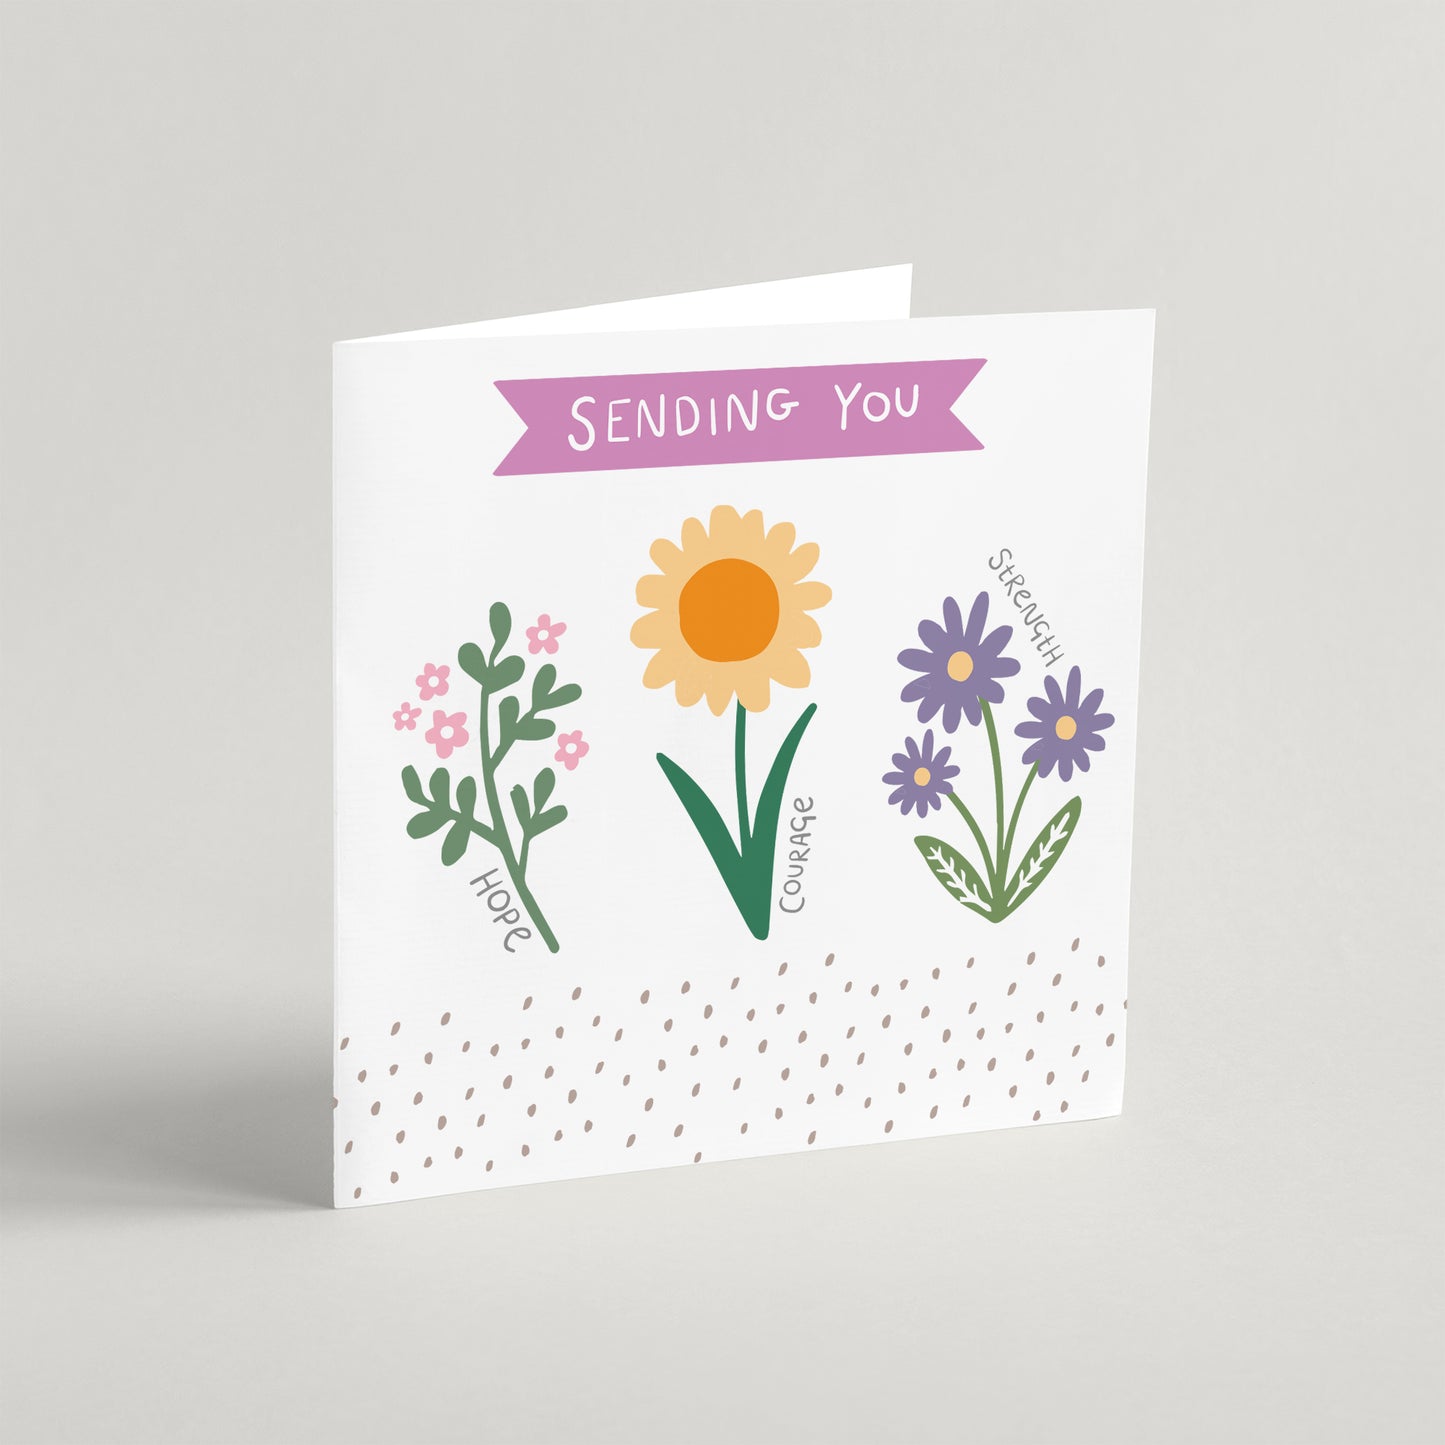 Sending You Hope, Courage and Strength - greeting card